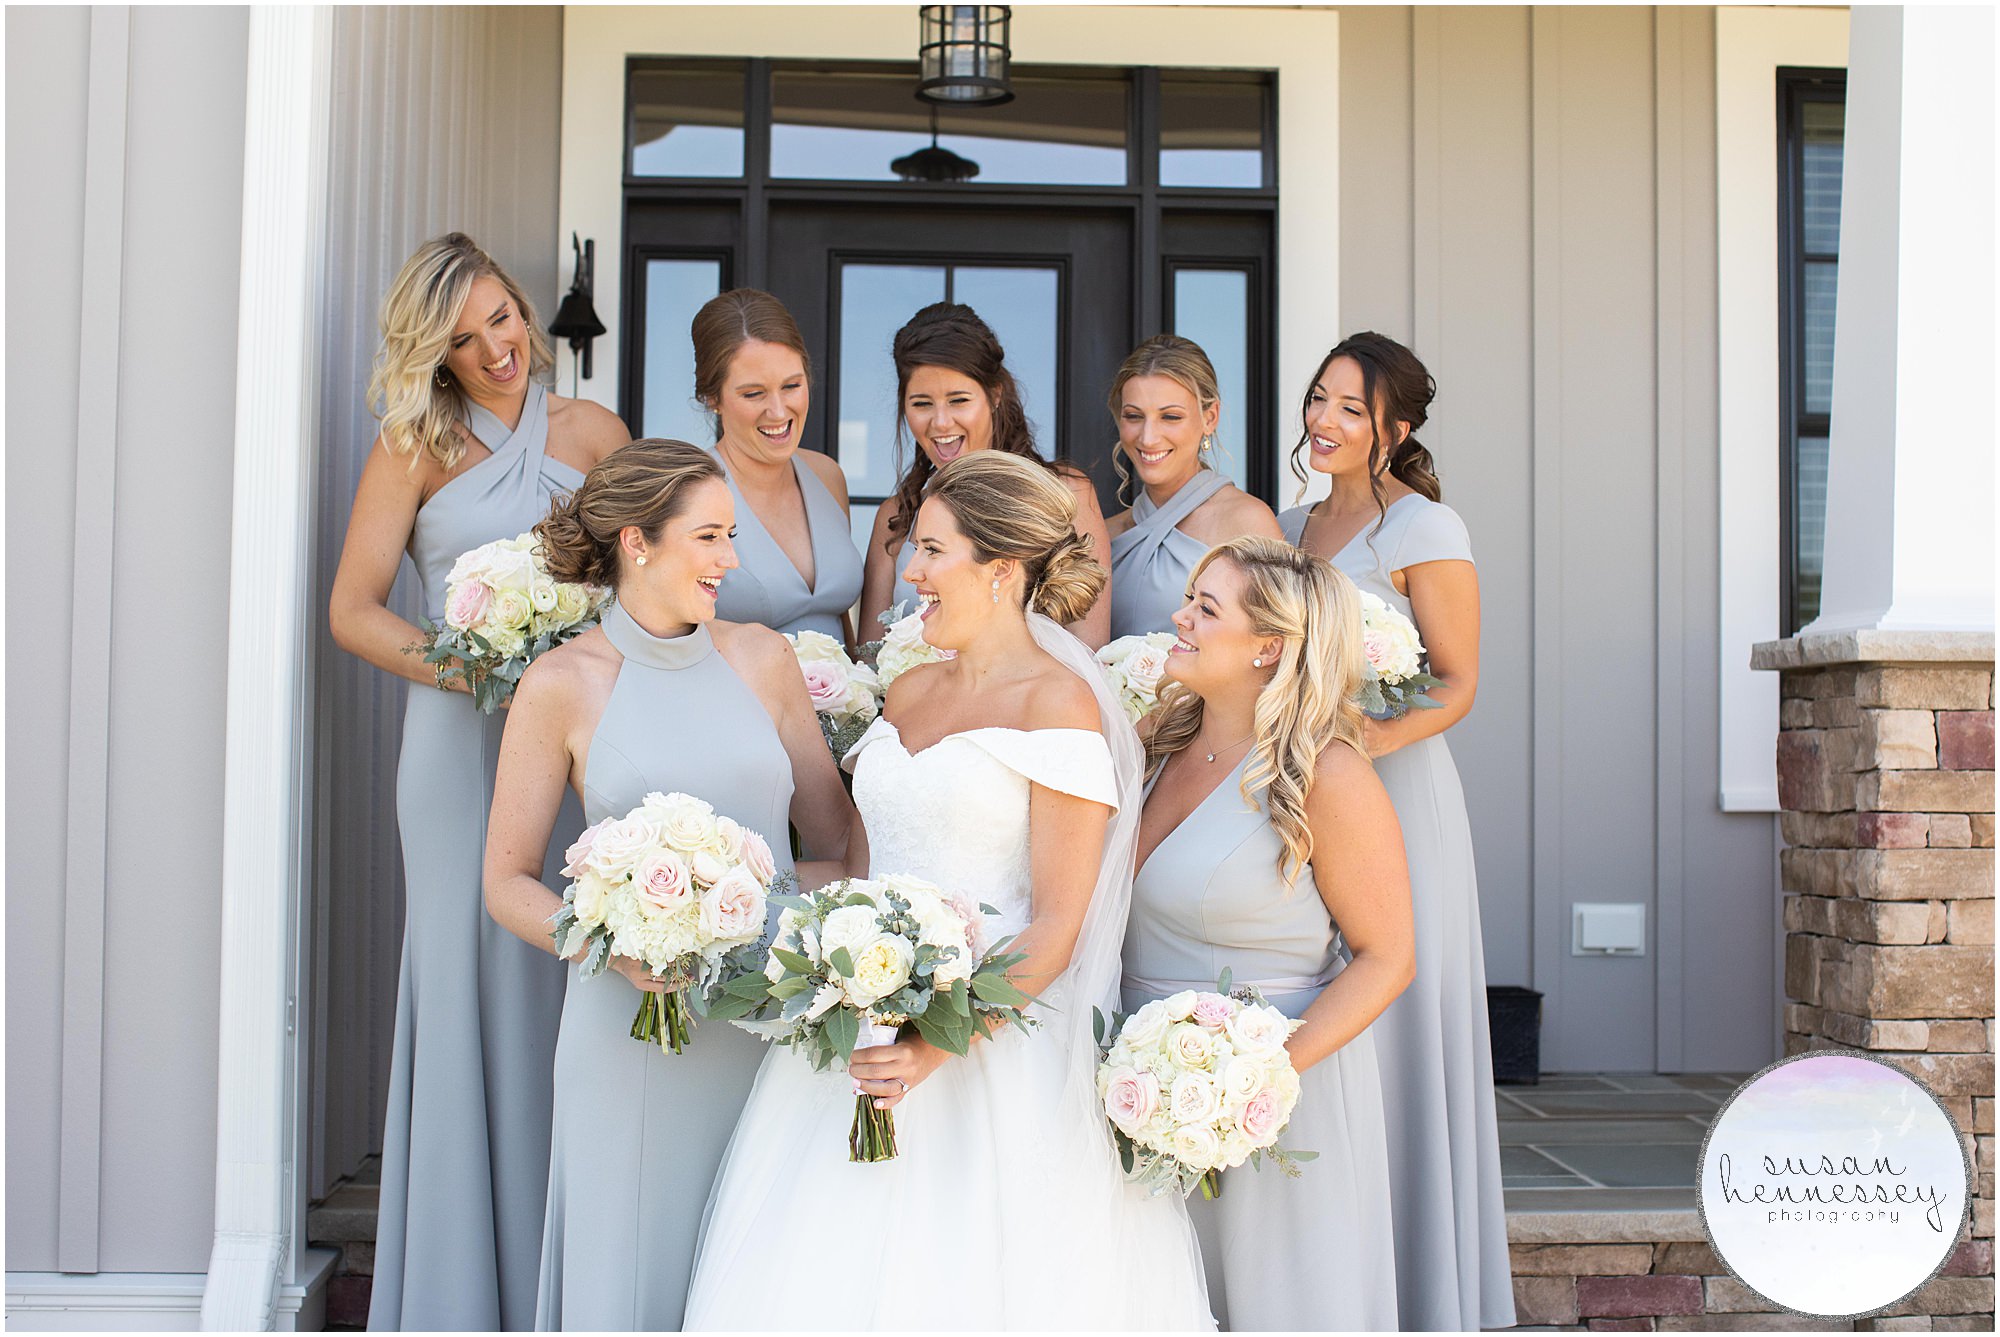 Bride and bridesmaids laugh before traditional church ceremony